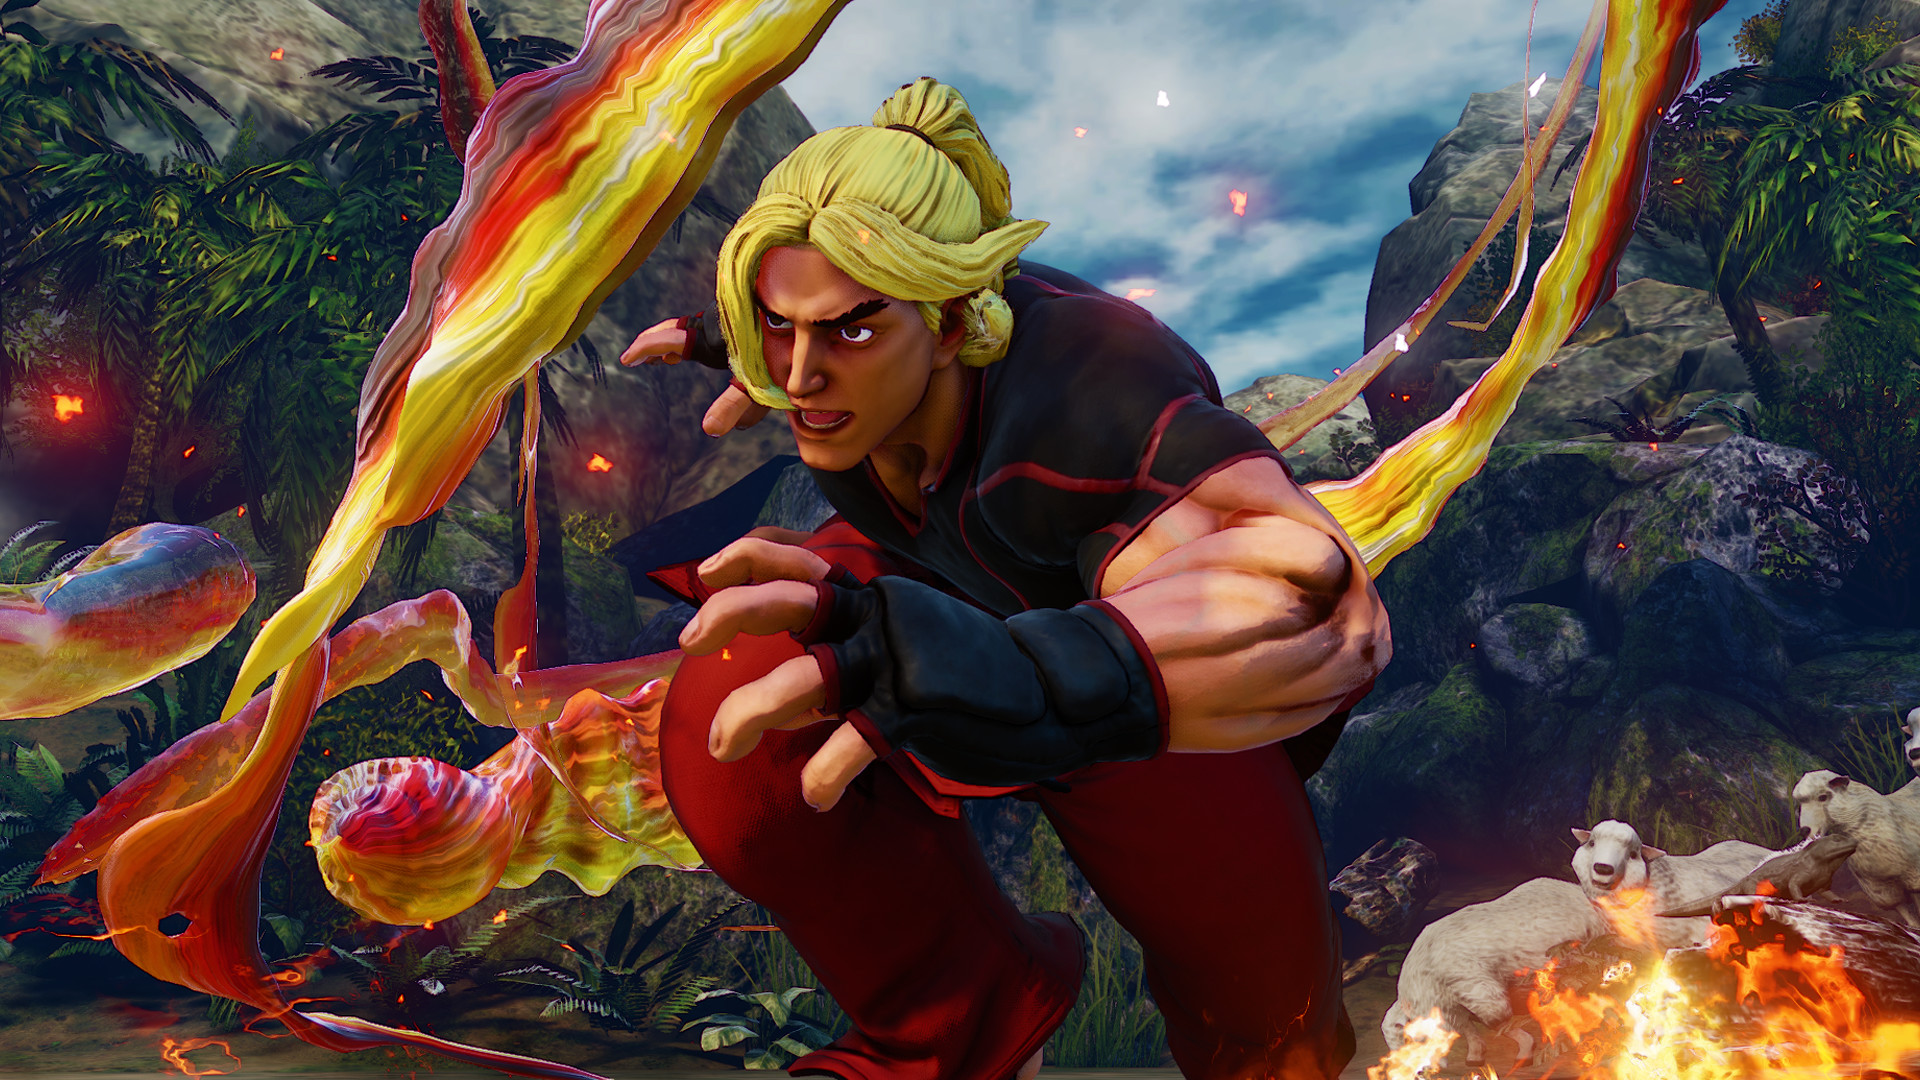 Fortnite Welcomes Street Fighter's Guile And Cammy To The Battle